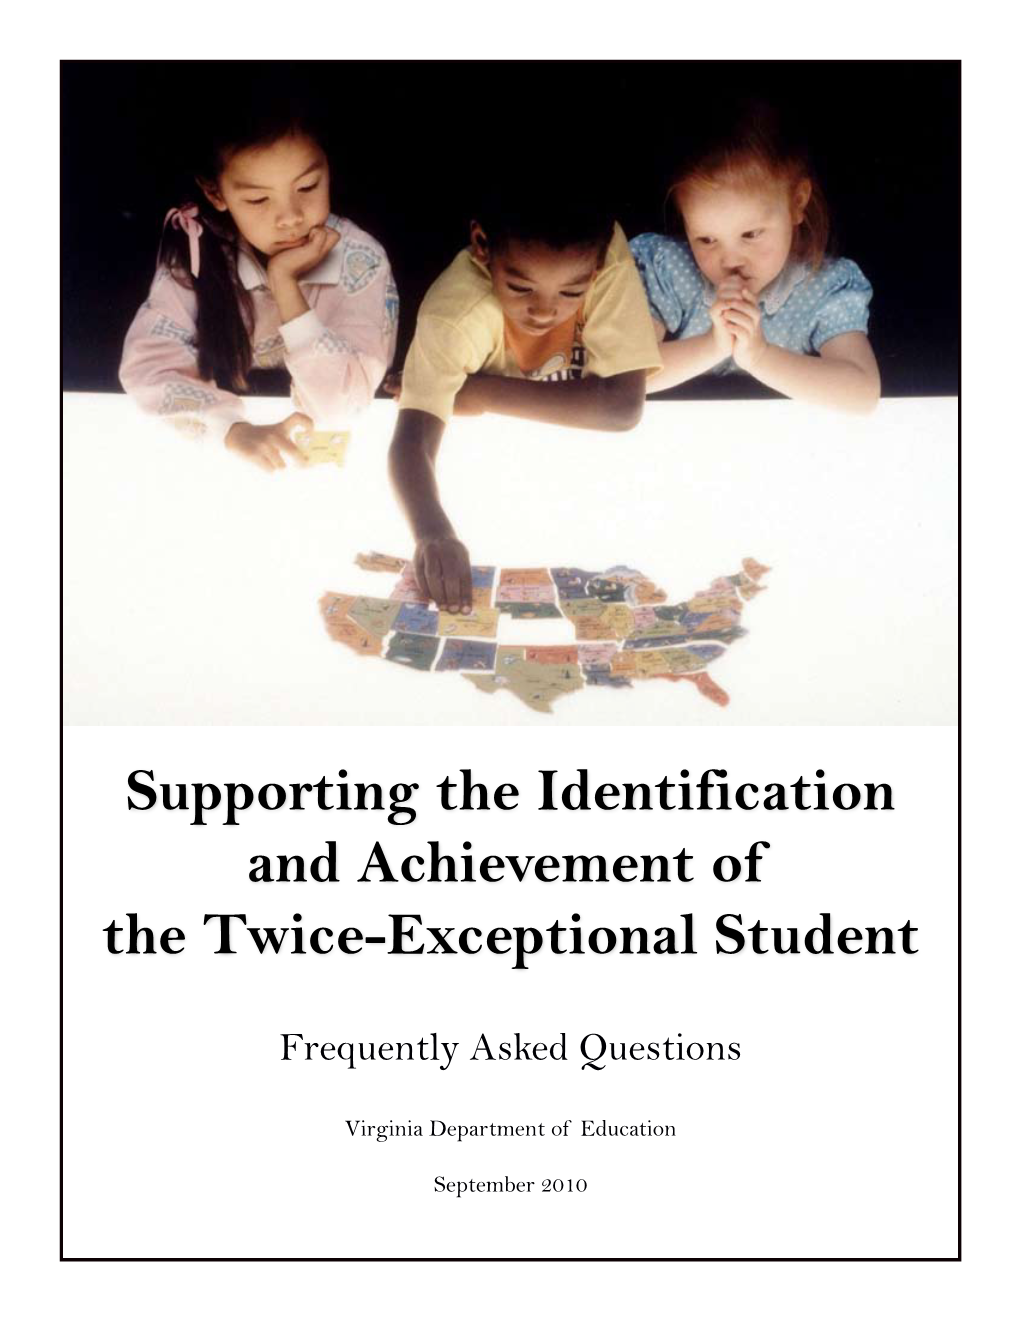 Supporting the Identification and Achievement of Twice-Exceptional